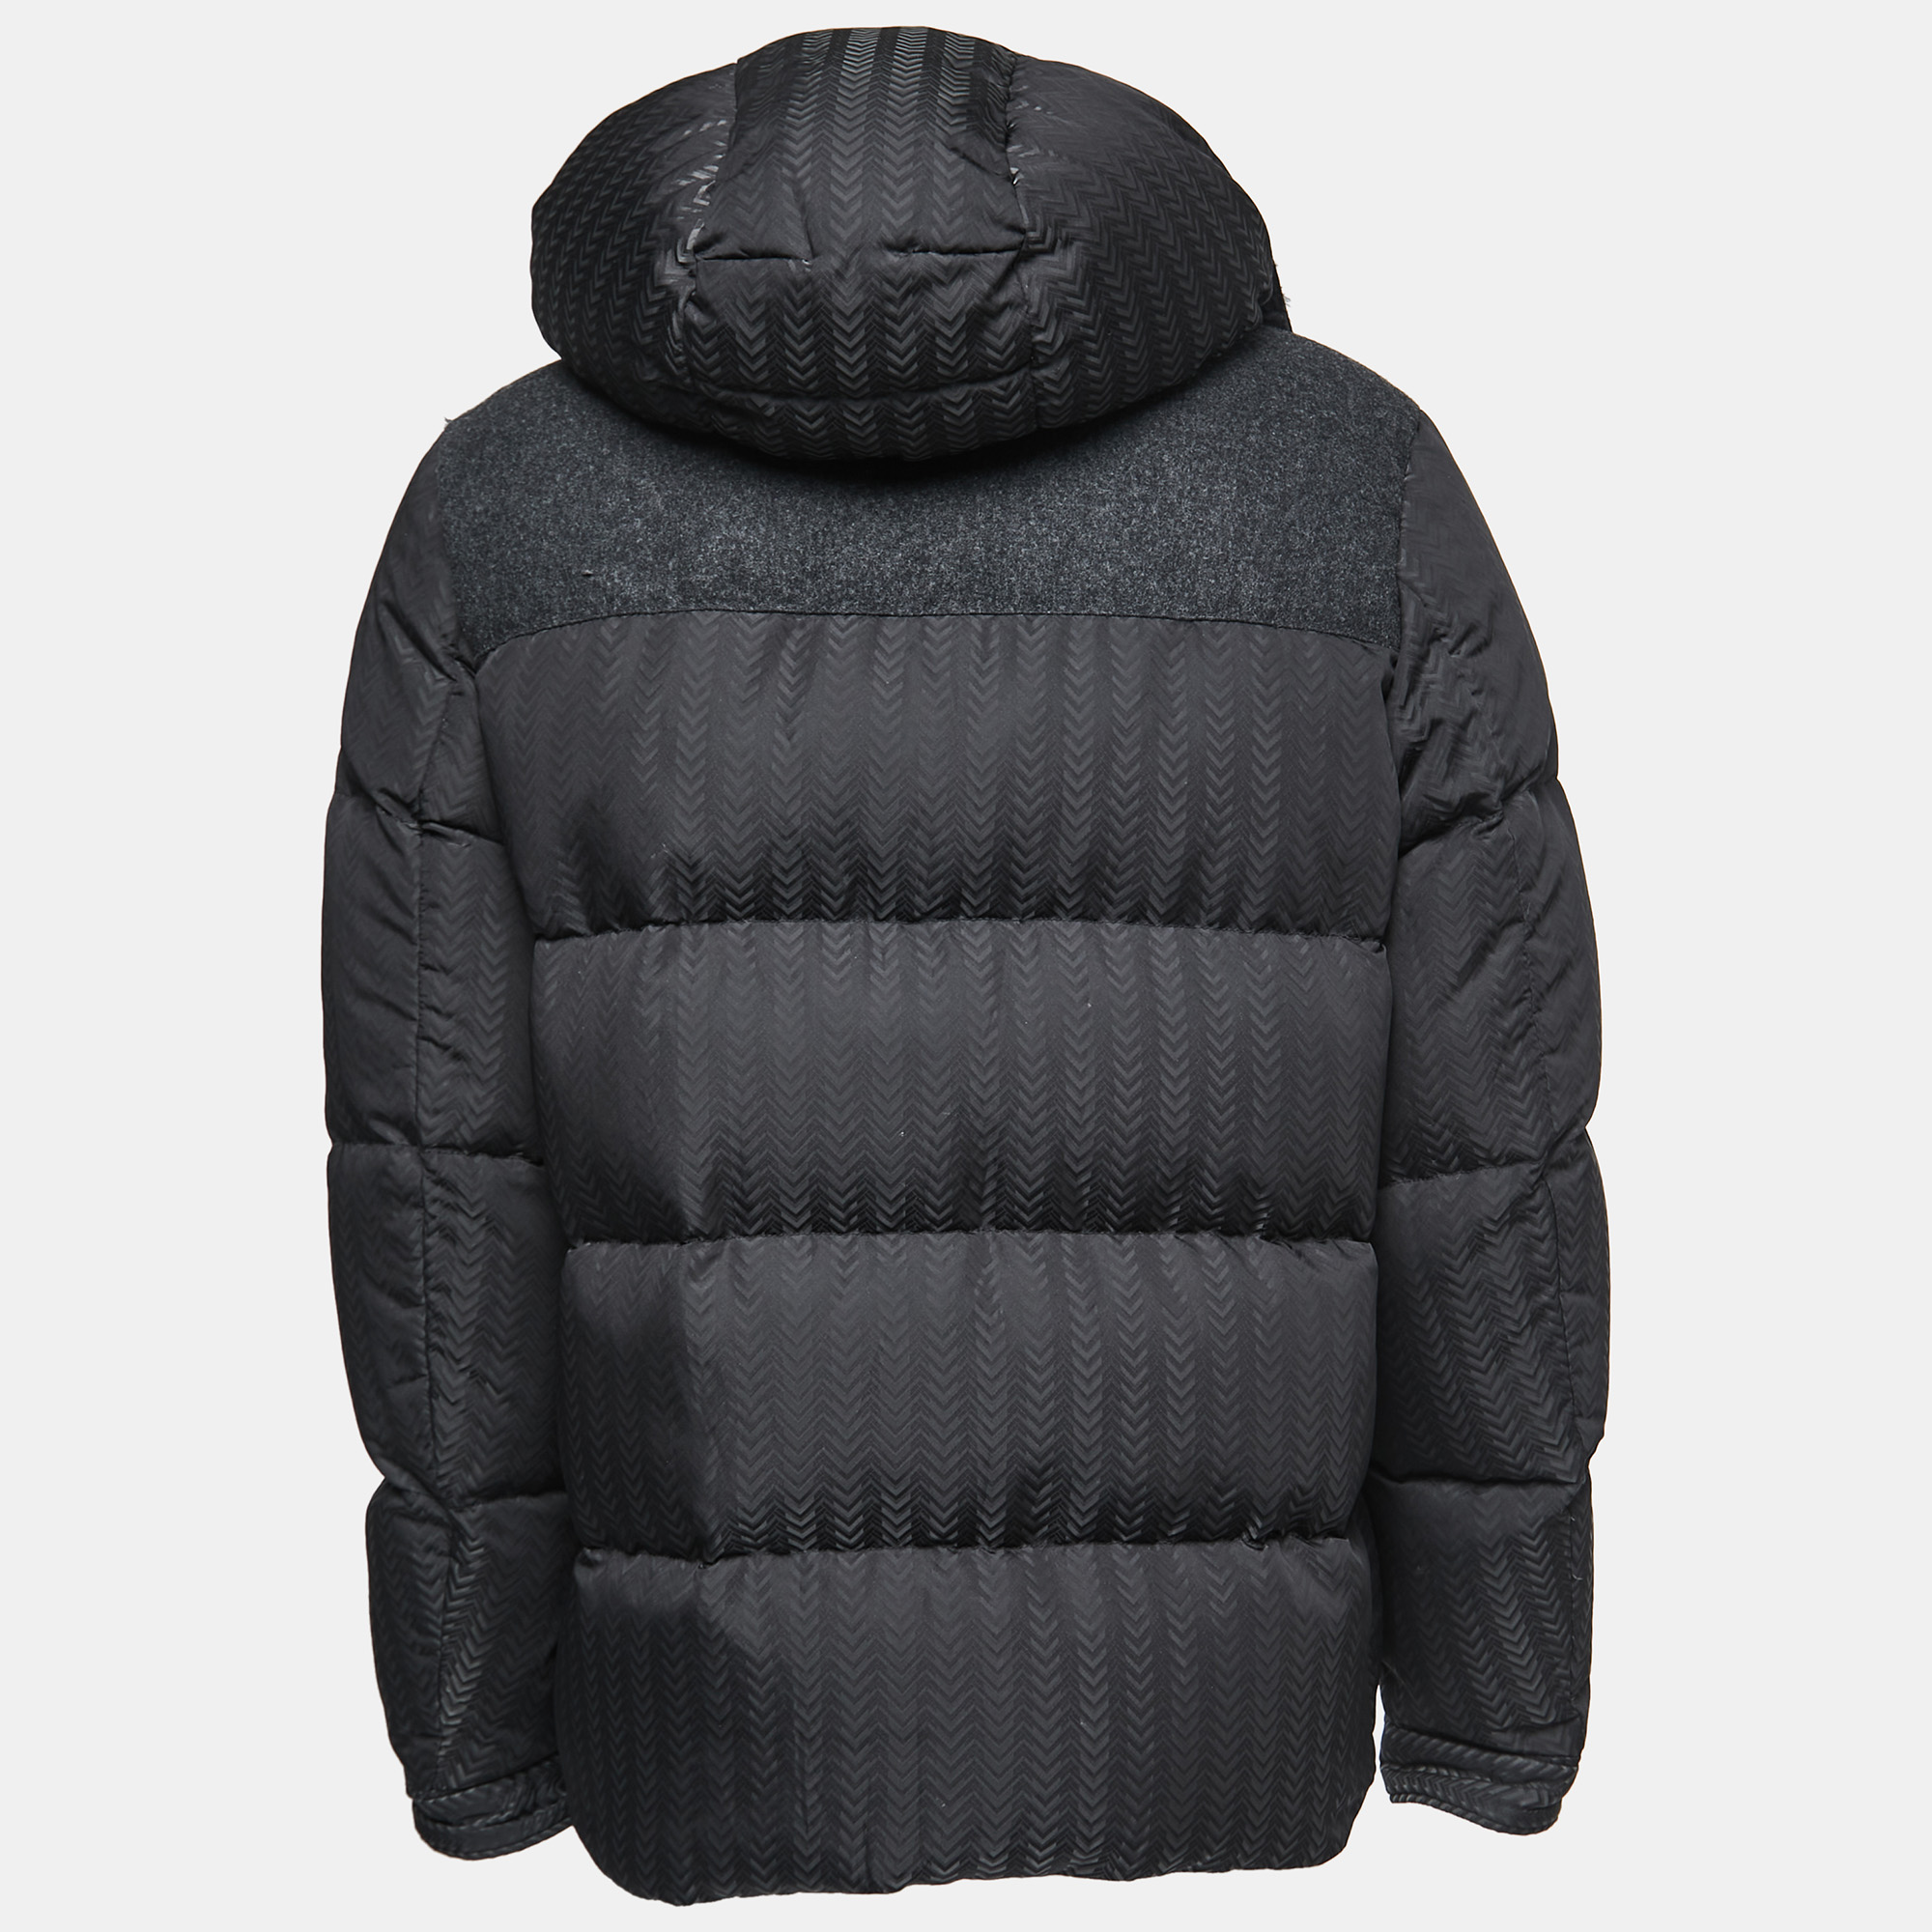 

Moncler Black Chevron Patterned Synthetic Hooded Puffer Jacket